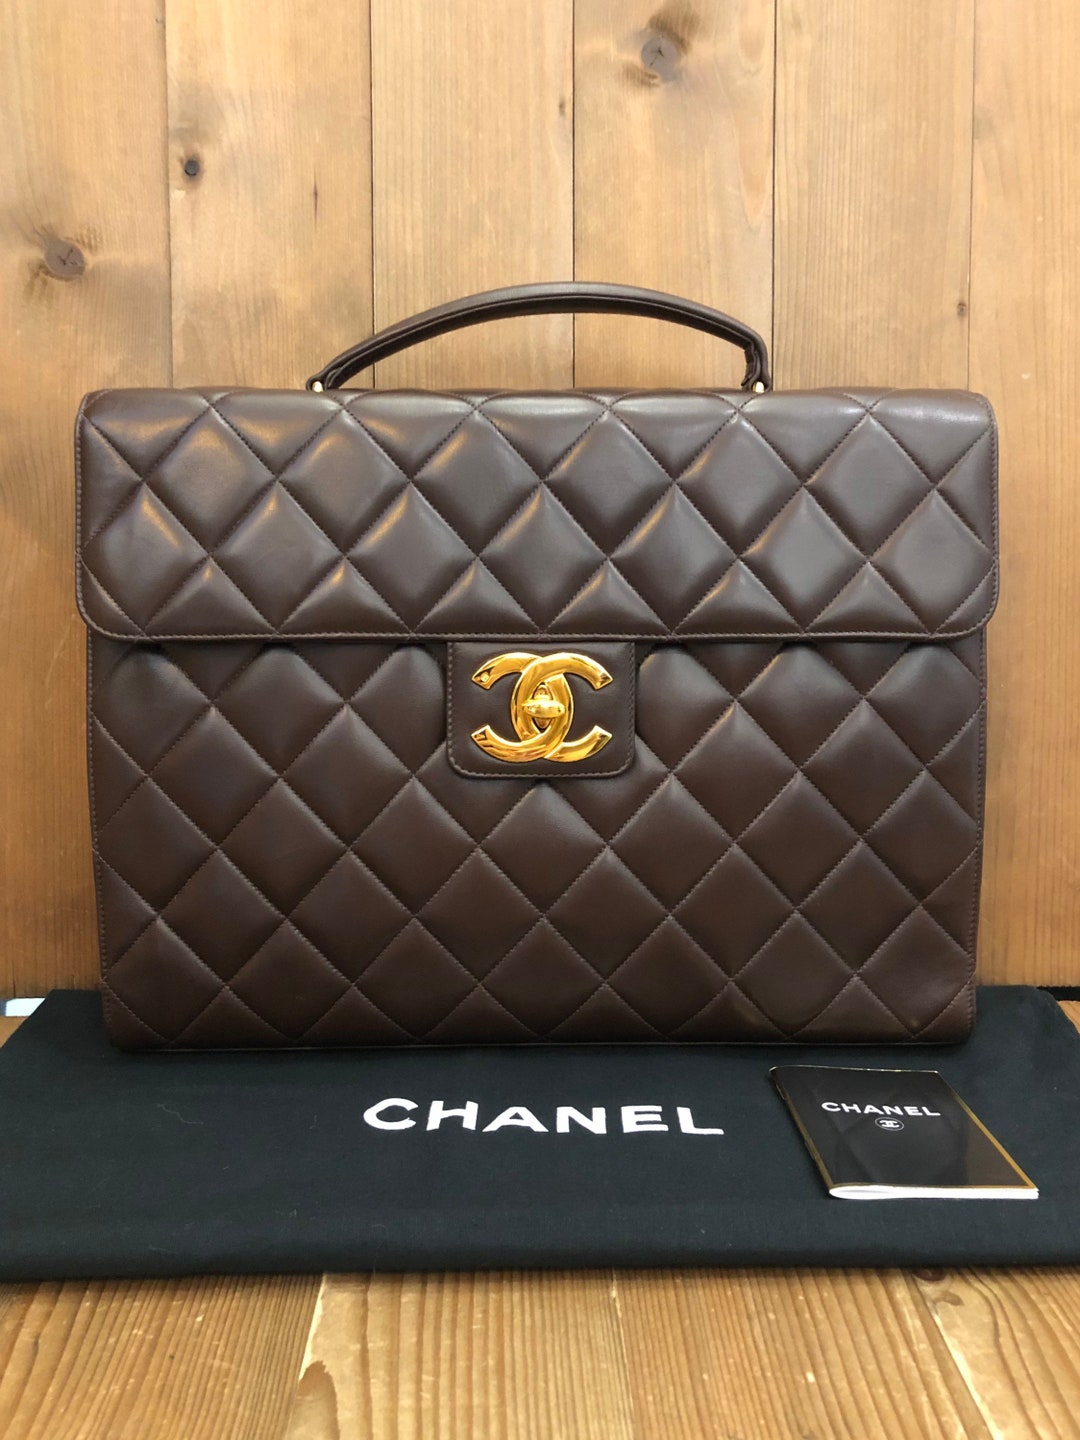 Vintage, Authentic Chanel Uni-sex Black Leather Briefcase 15in x 11in x 2in